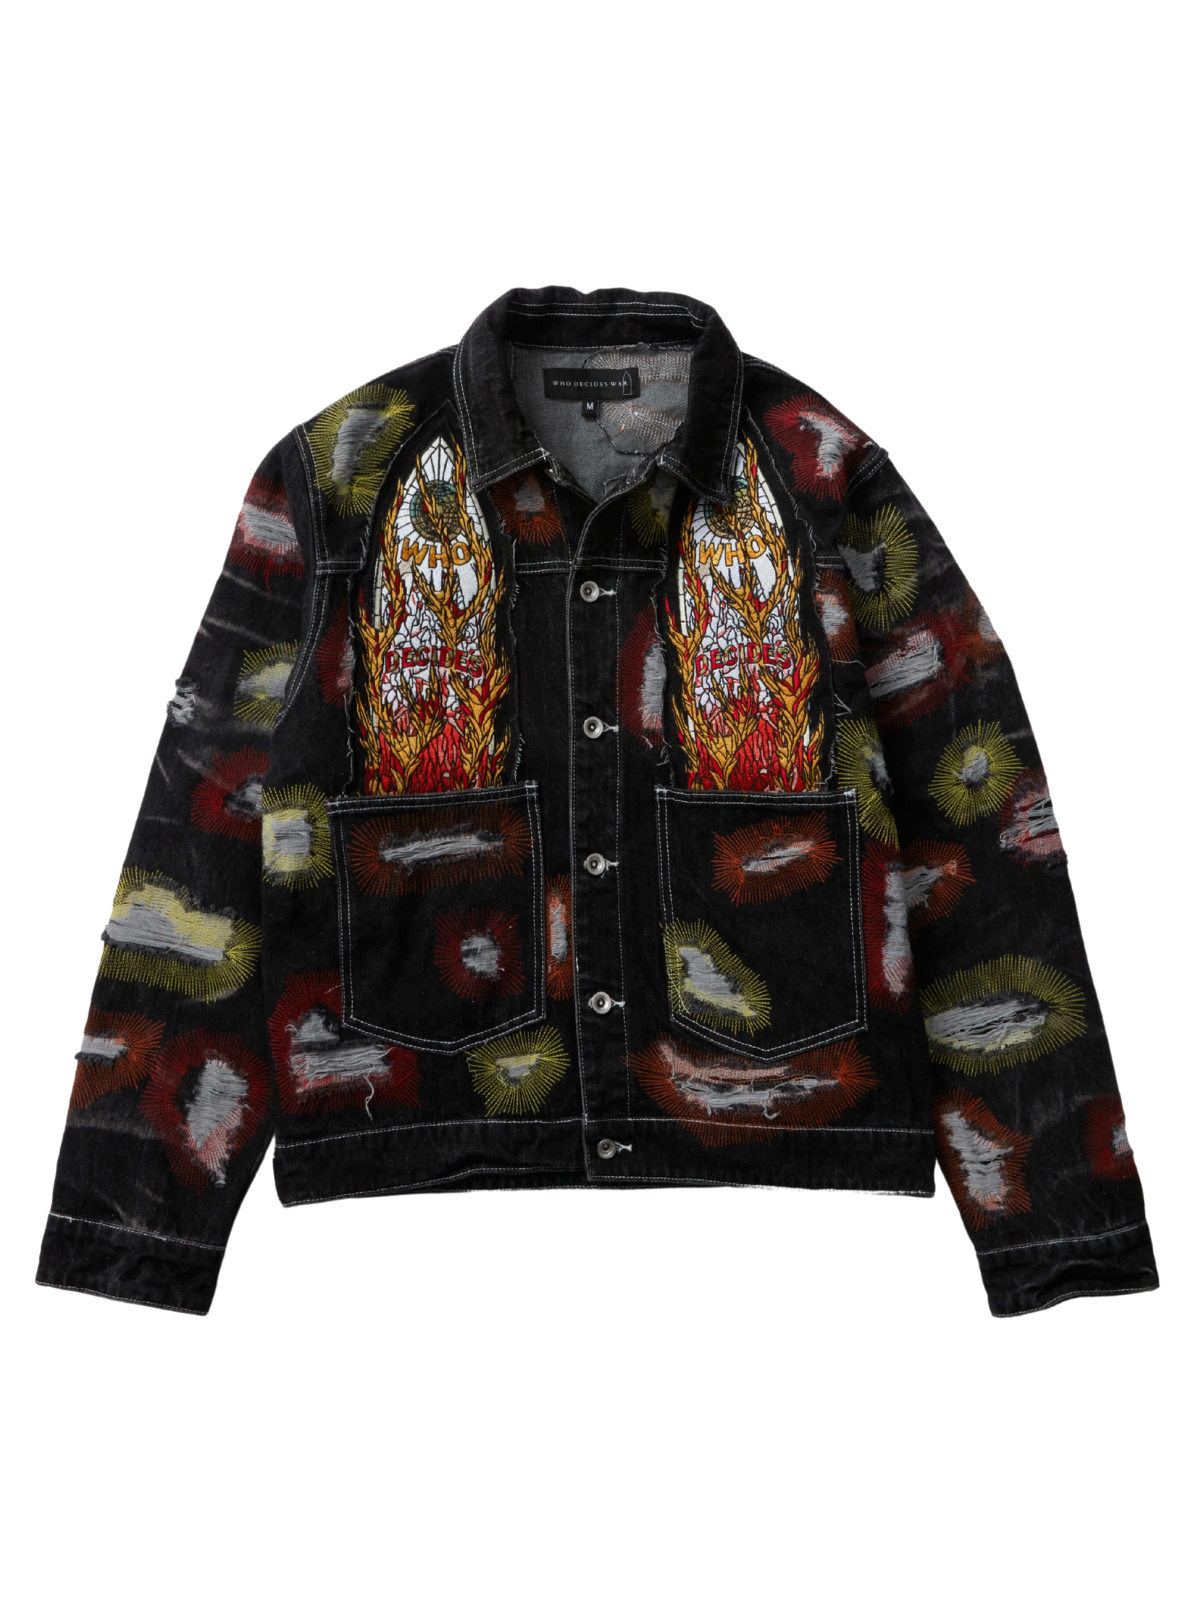 Who Decides War Jacket All Over Embroidery Trucker Multi